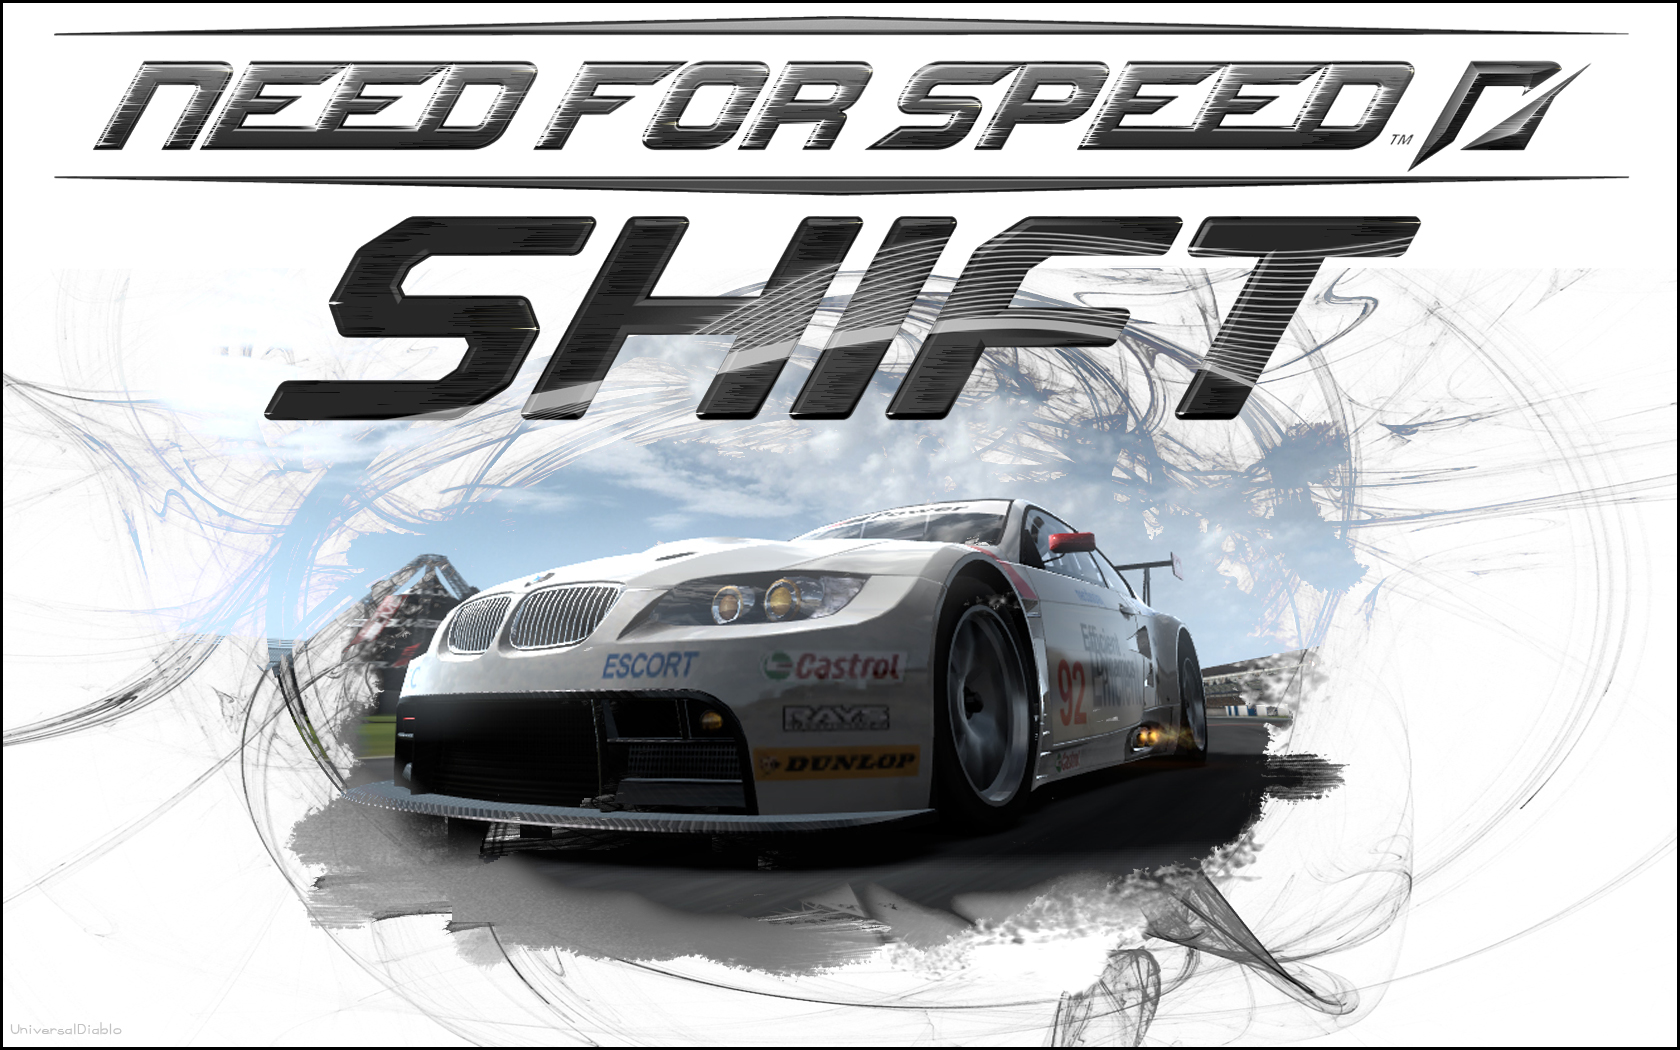 Need for Speed Shift - Download for PC Free